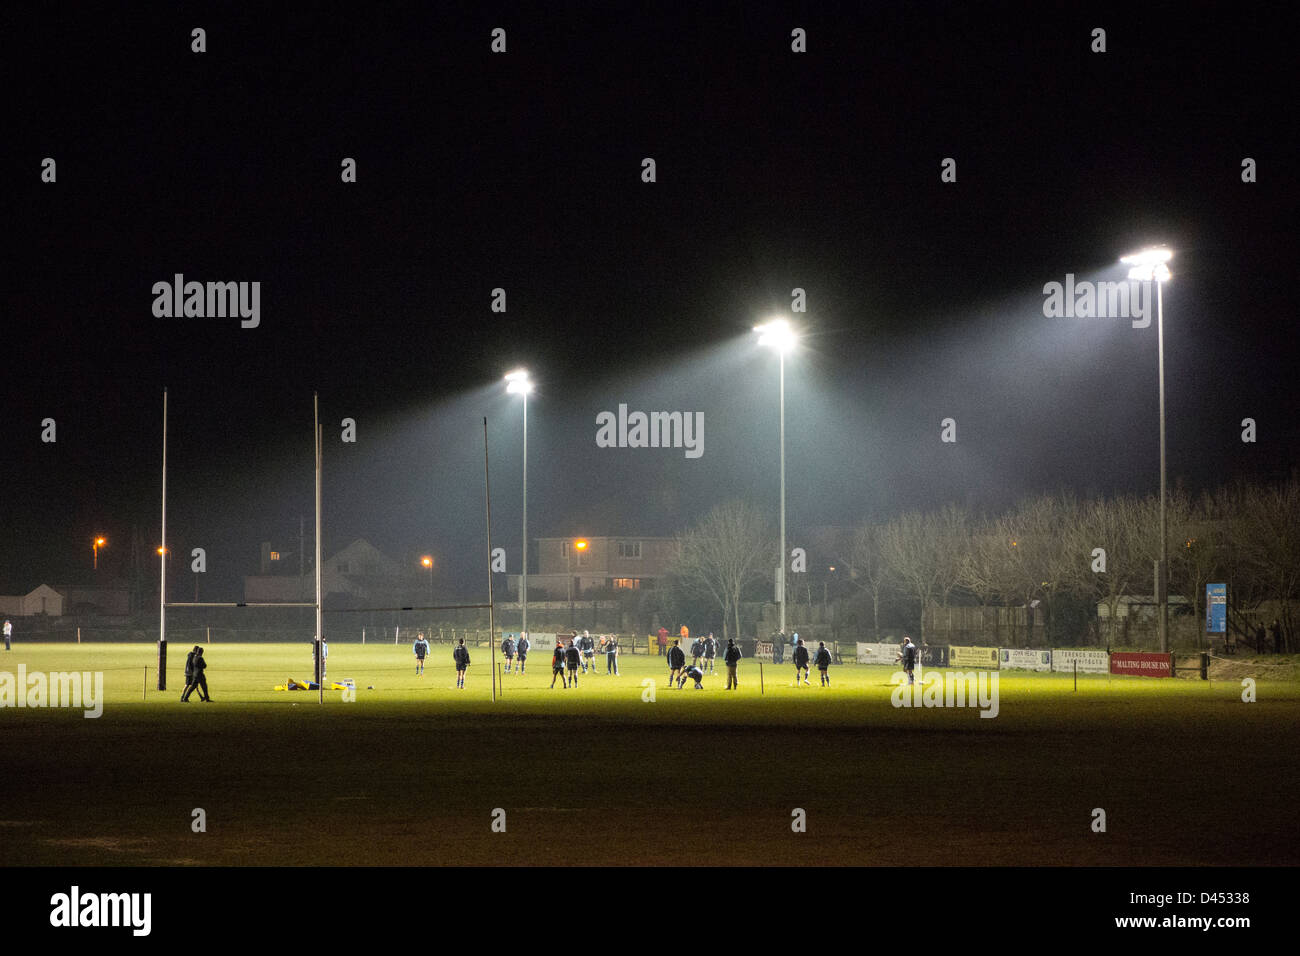 Rugby players exercising on the pitch at night, illuminated by floodlights - near Dublin, Ireland Stock Photo